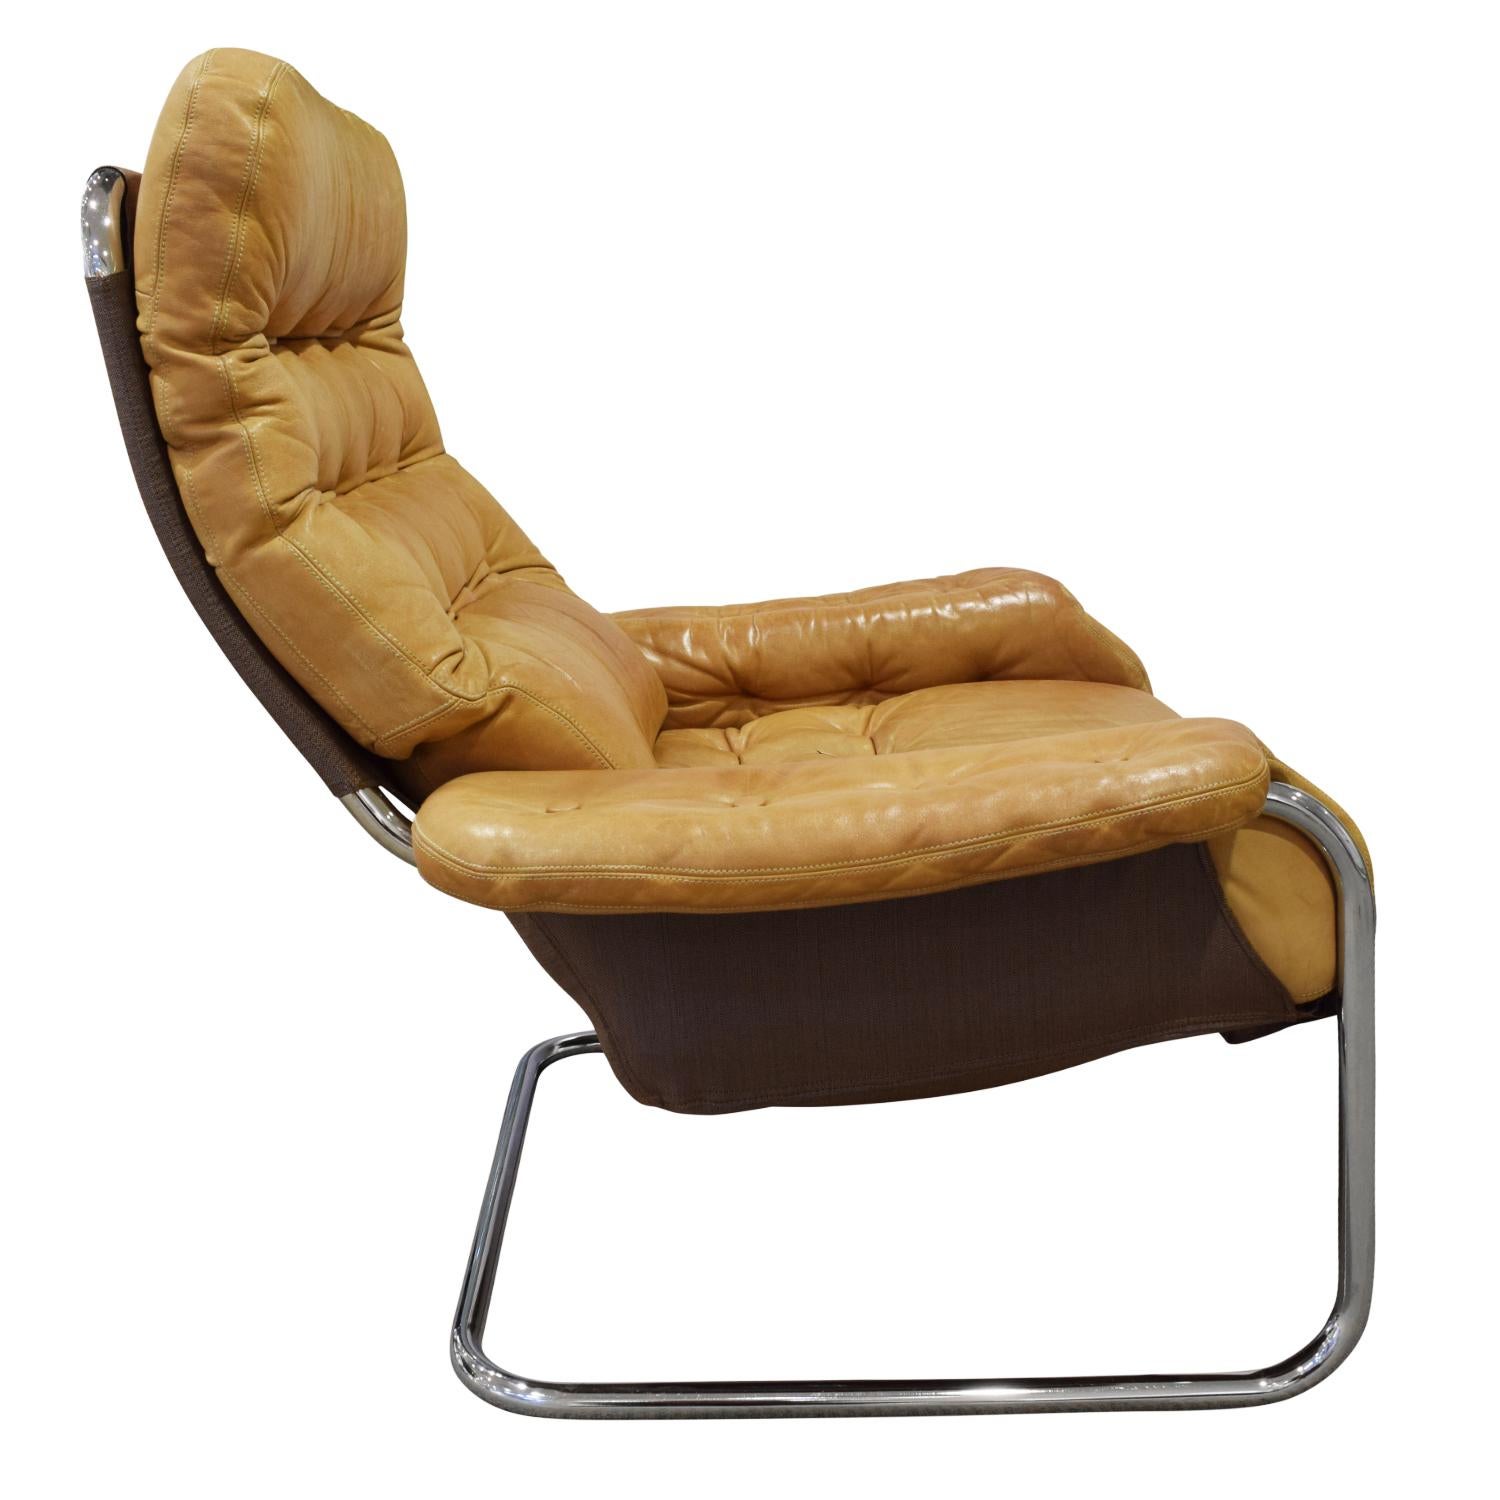 Hand-Crafted DUX Chair and Ottoman in Polished Chrome and Leather Upholstery, 1980s